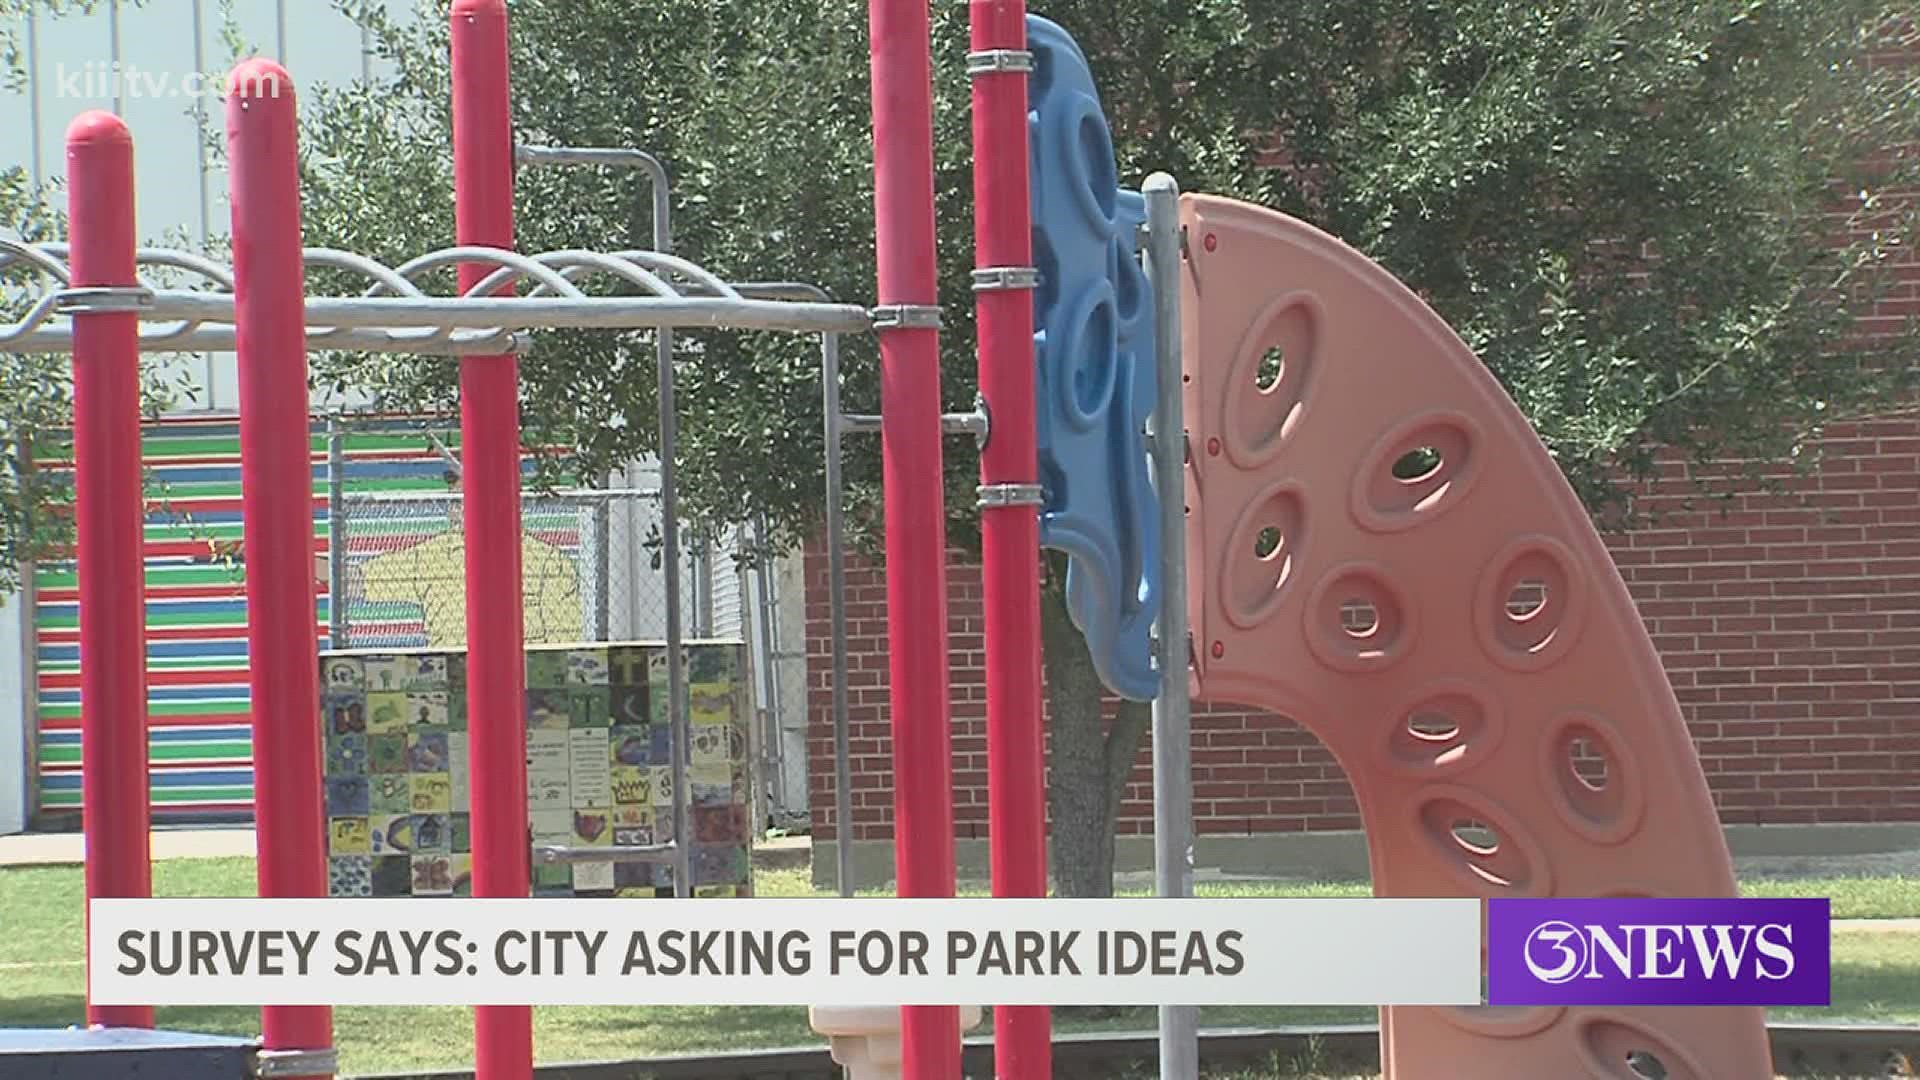 Officials are asking residents to fill out an online survey before the end of September to help them with their Parks Master Plan.